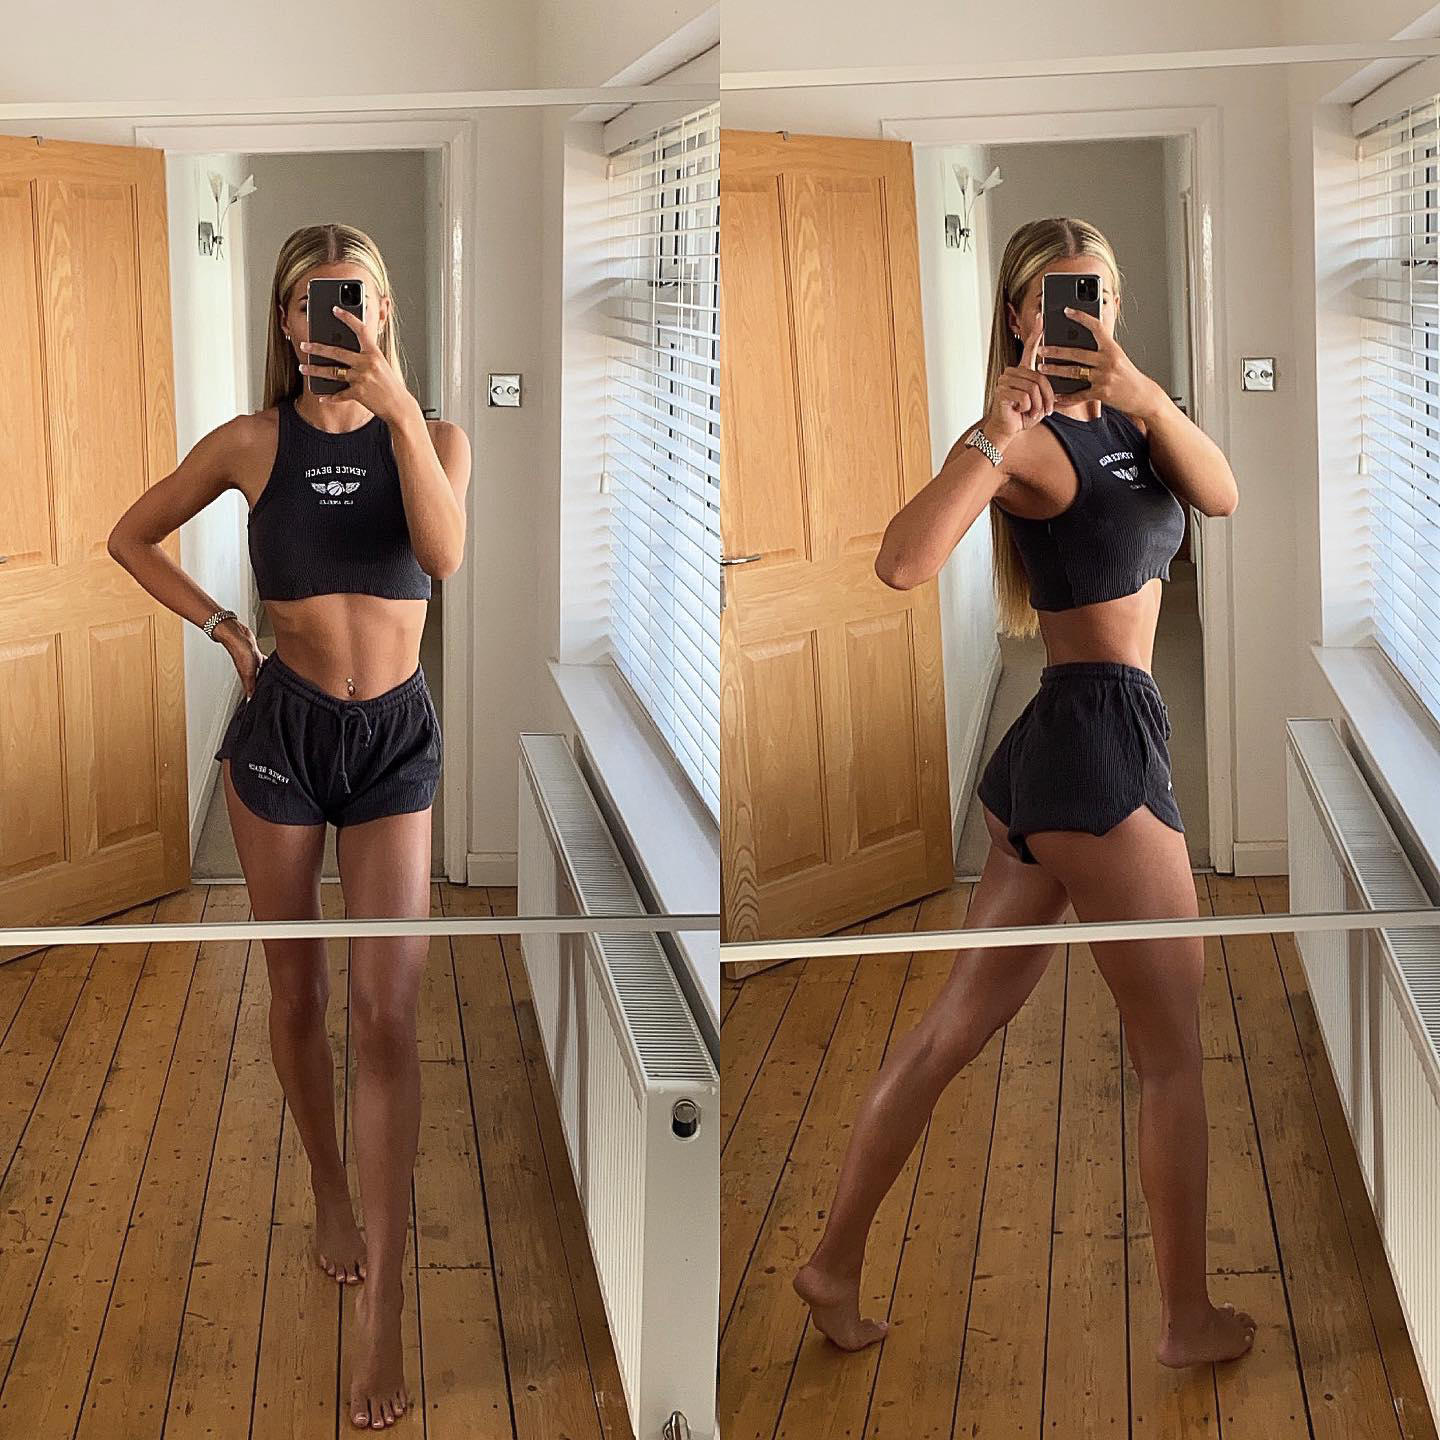 EMMA | PERSONAL TRAINER - Post of the day : 24/8/2022